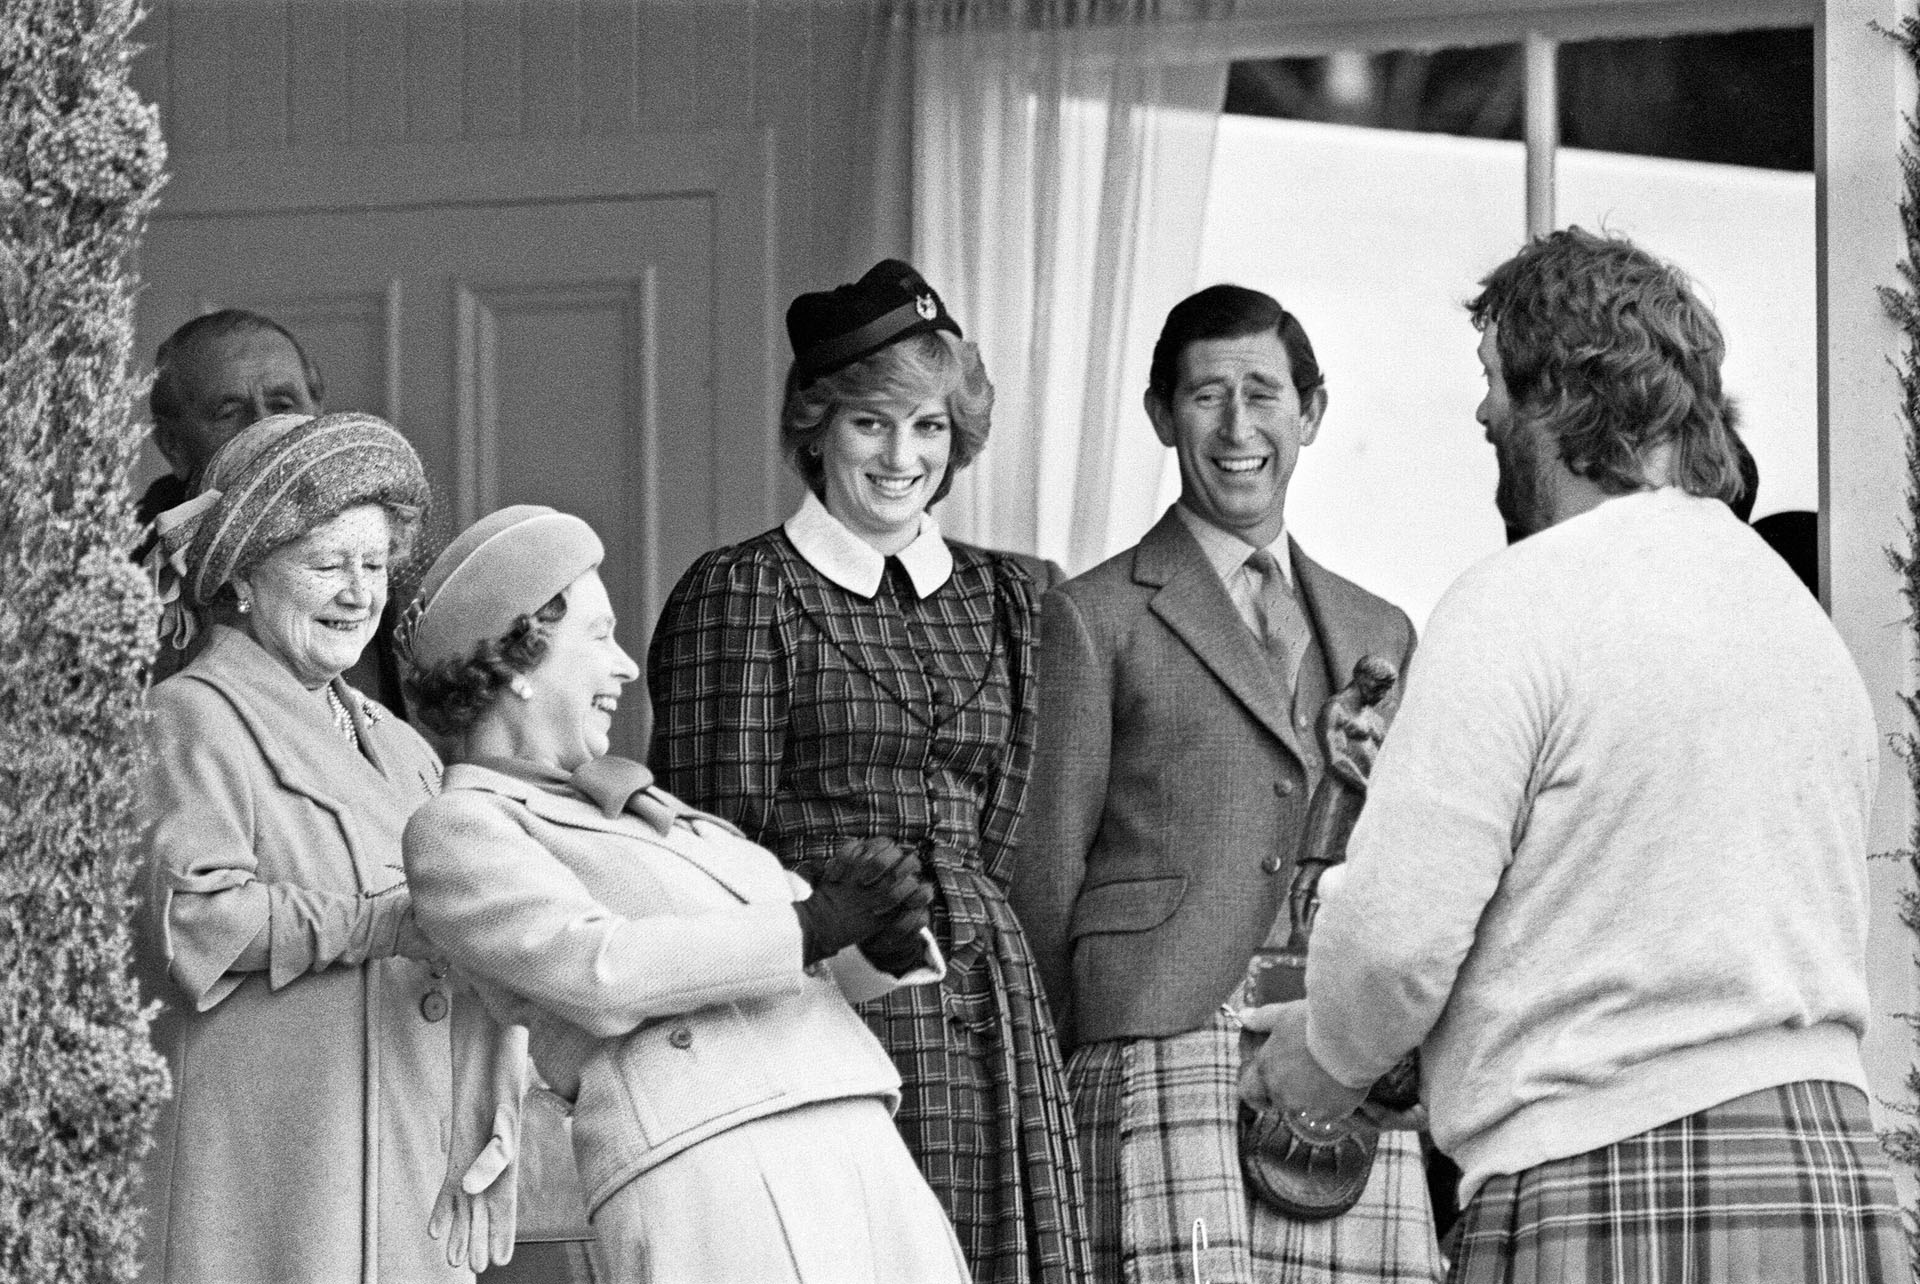 The Royal family share a joke with Geoff Capes as they attend the Braemar Highland Games in Scotland. Left to right are: The Queen Mother, Queen Elizabeth II, Princess Diana, Prince Charles and Geoff Capes. 4th September 1982. (Photo by Kent Gavin/Mirrorpix/Getty Images)